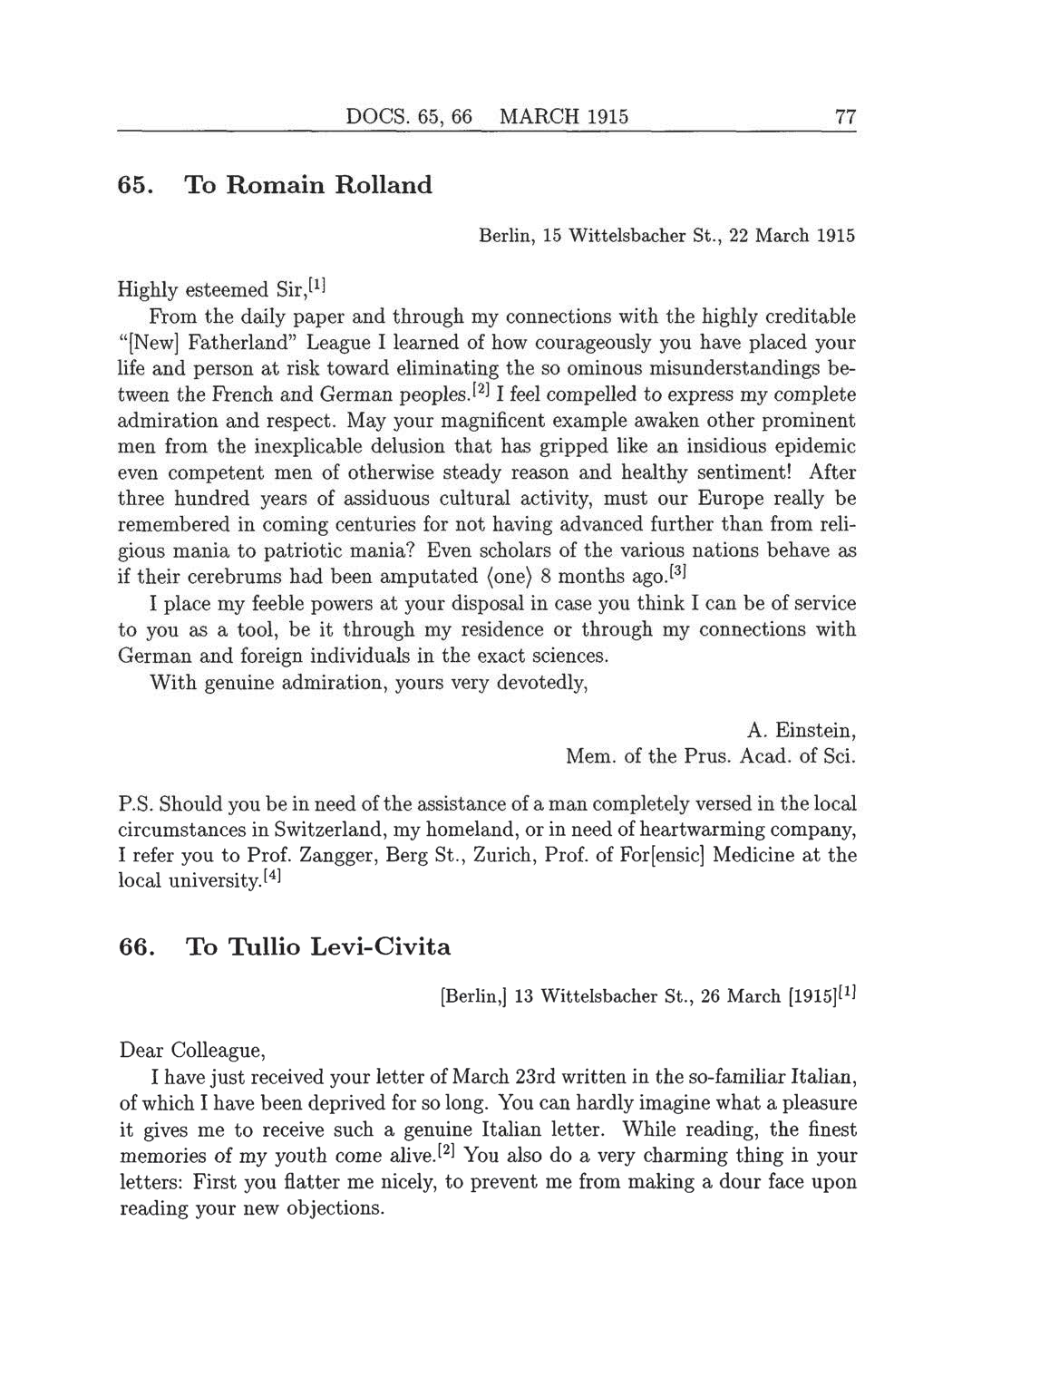 Volume 8: The Berlin Years: Correspondence, 1914-1918 (English translation supplement) page 77